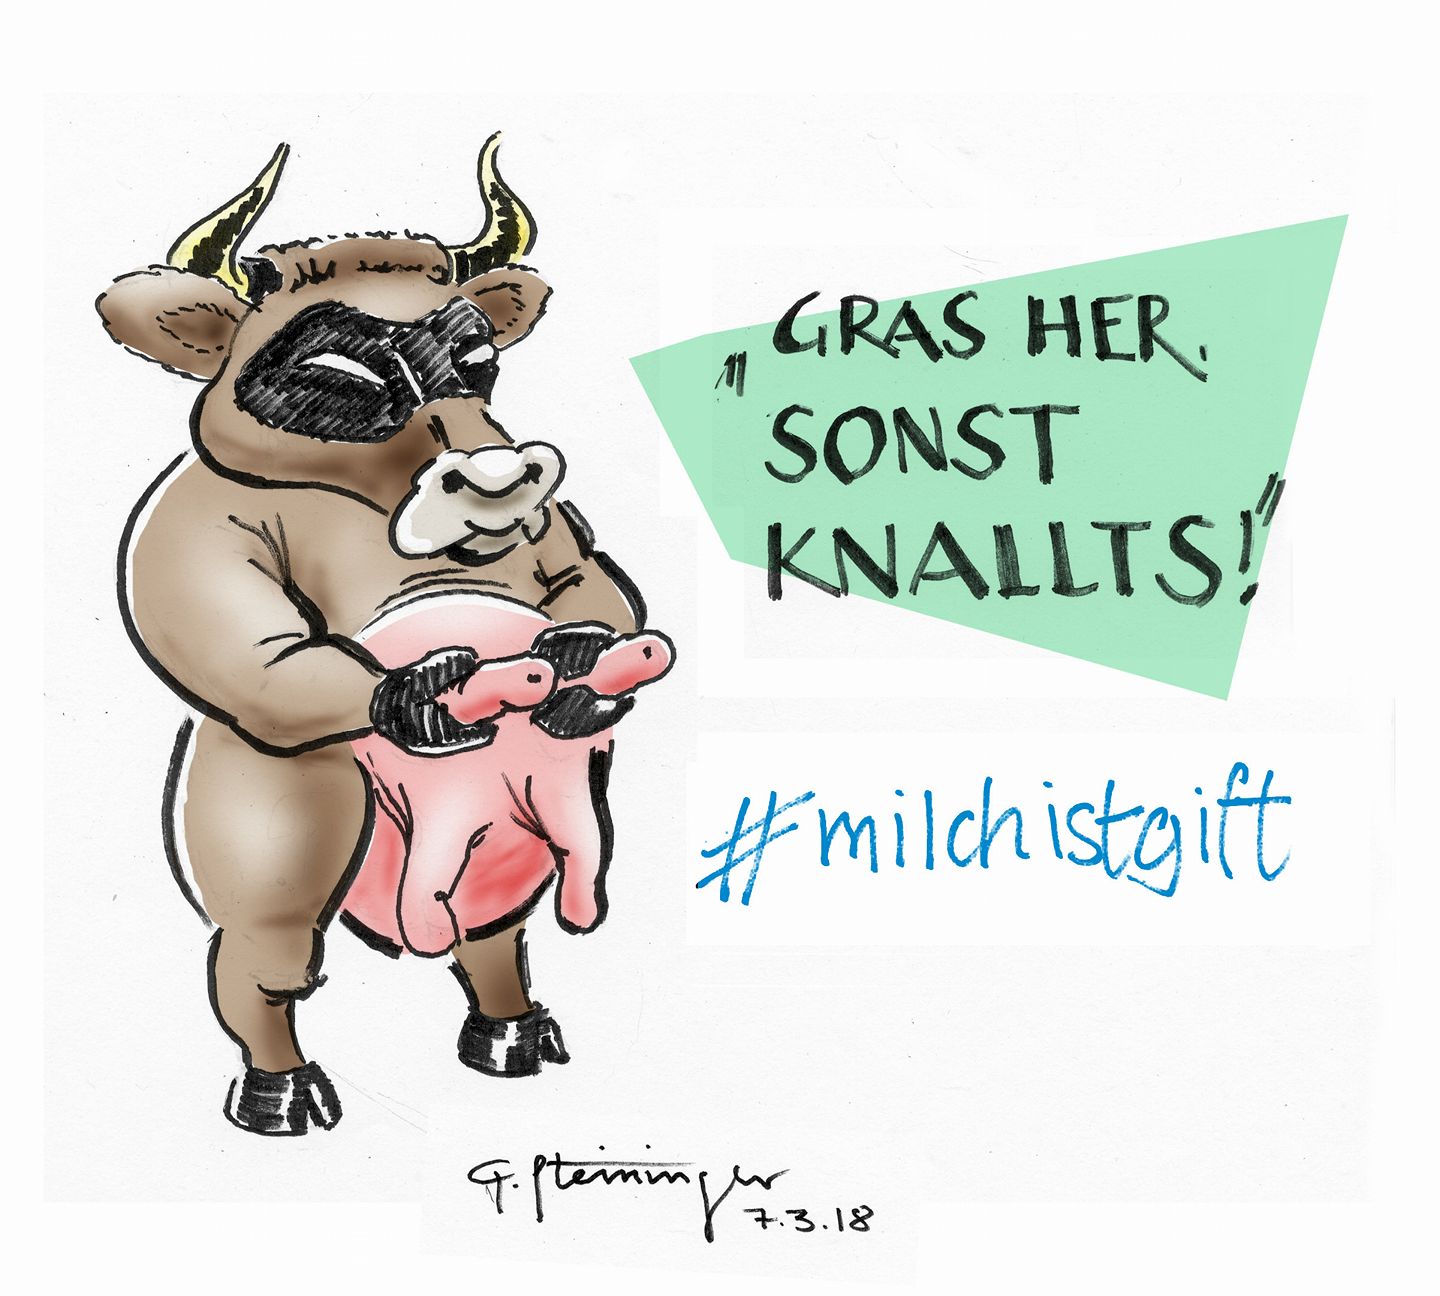 milch-ist-gift